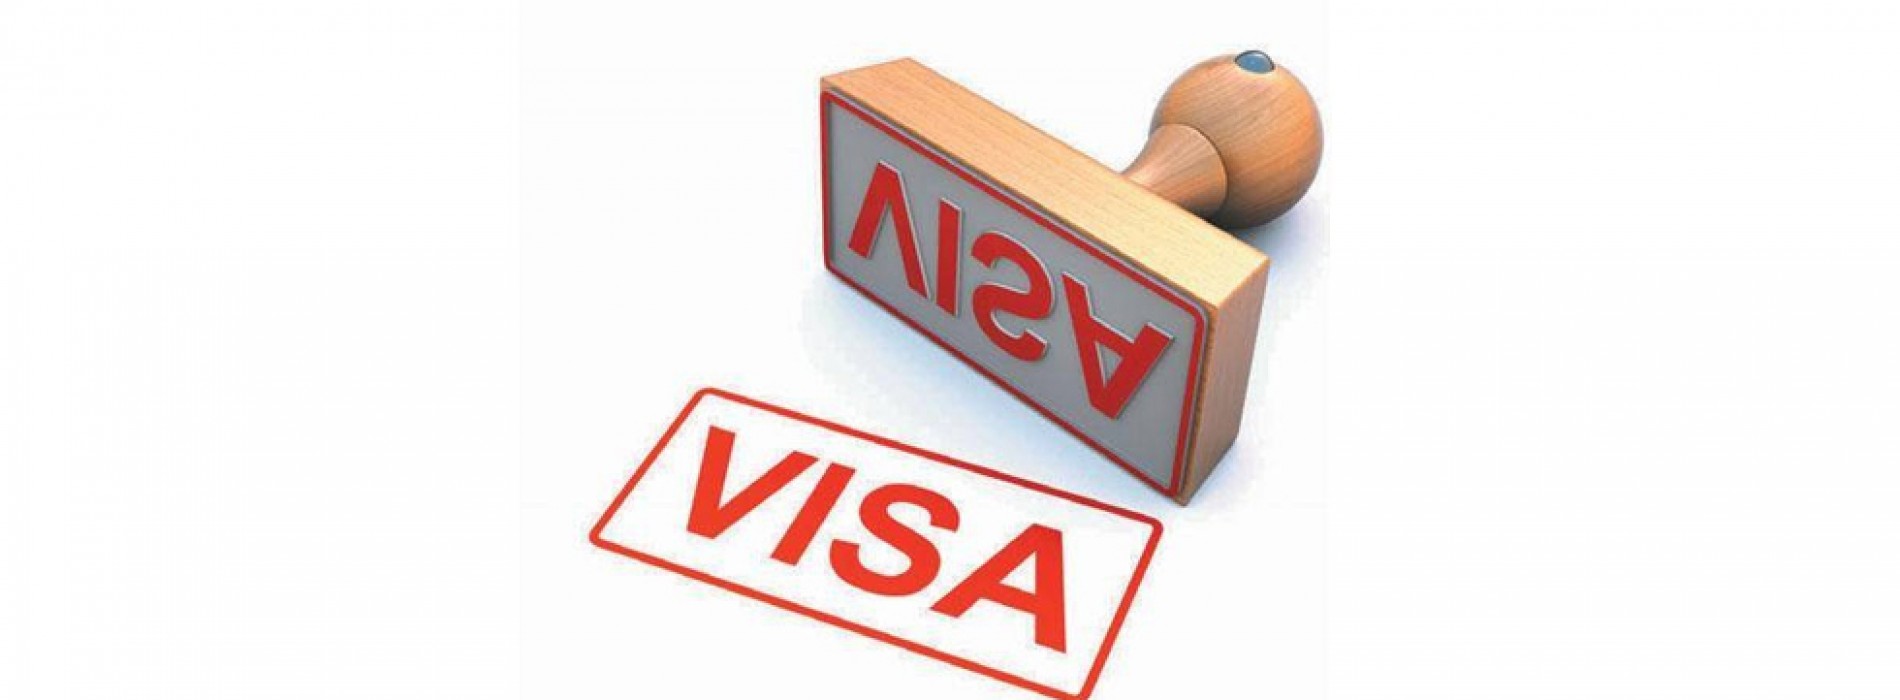 Now you just need one visa to travel across Malaysia, Singapore, Indonesia